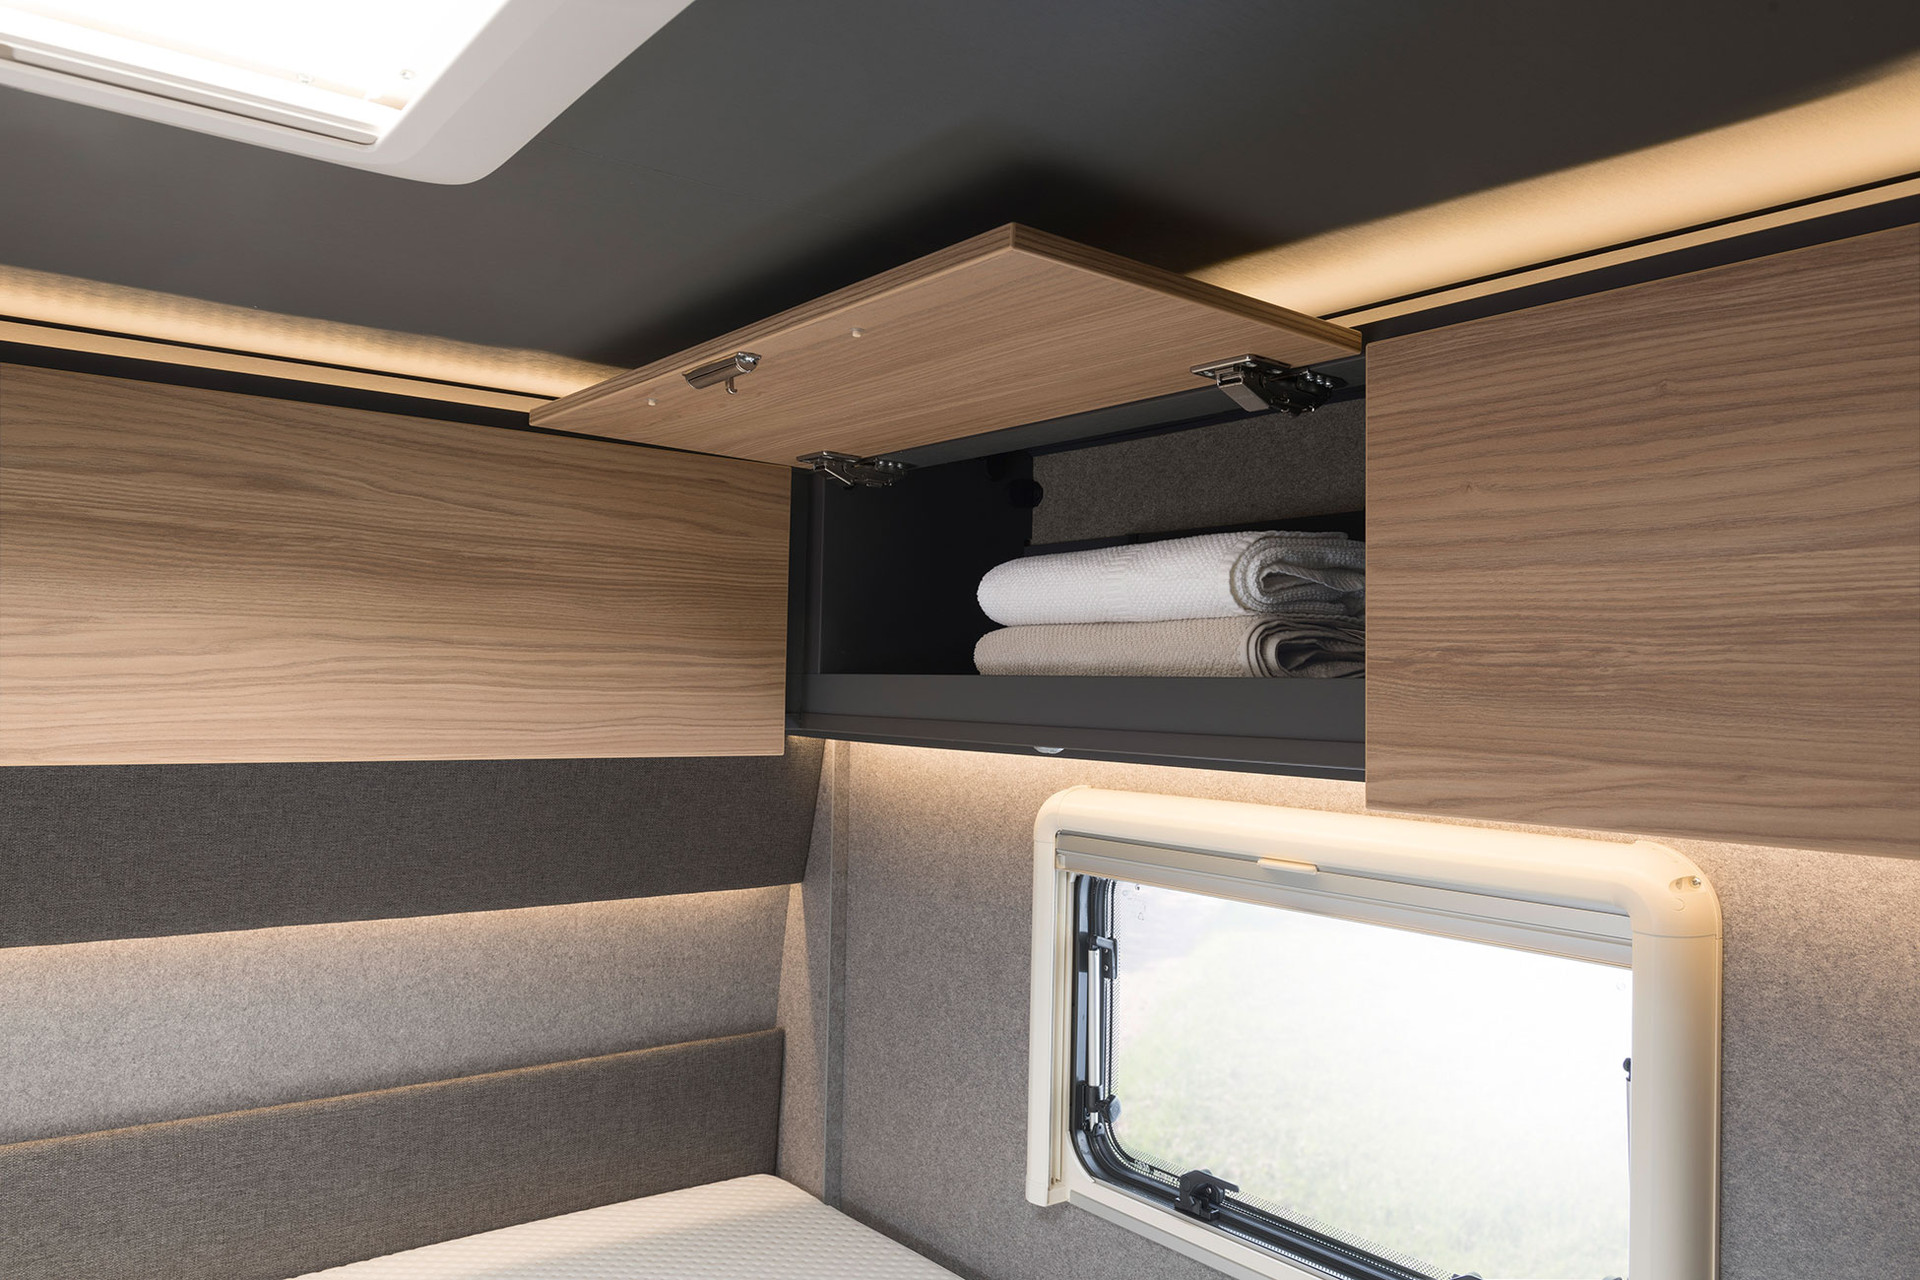 The overhead lockers are extremely roomy. They also feature AirPlus rear ventilation that prevents a build-up of condensation when the temperature drops.